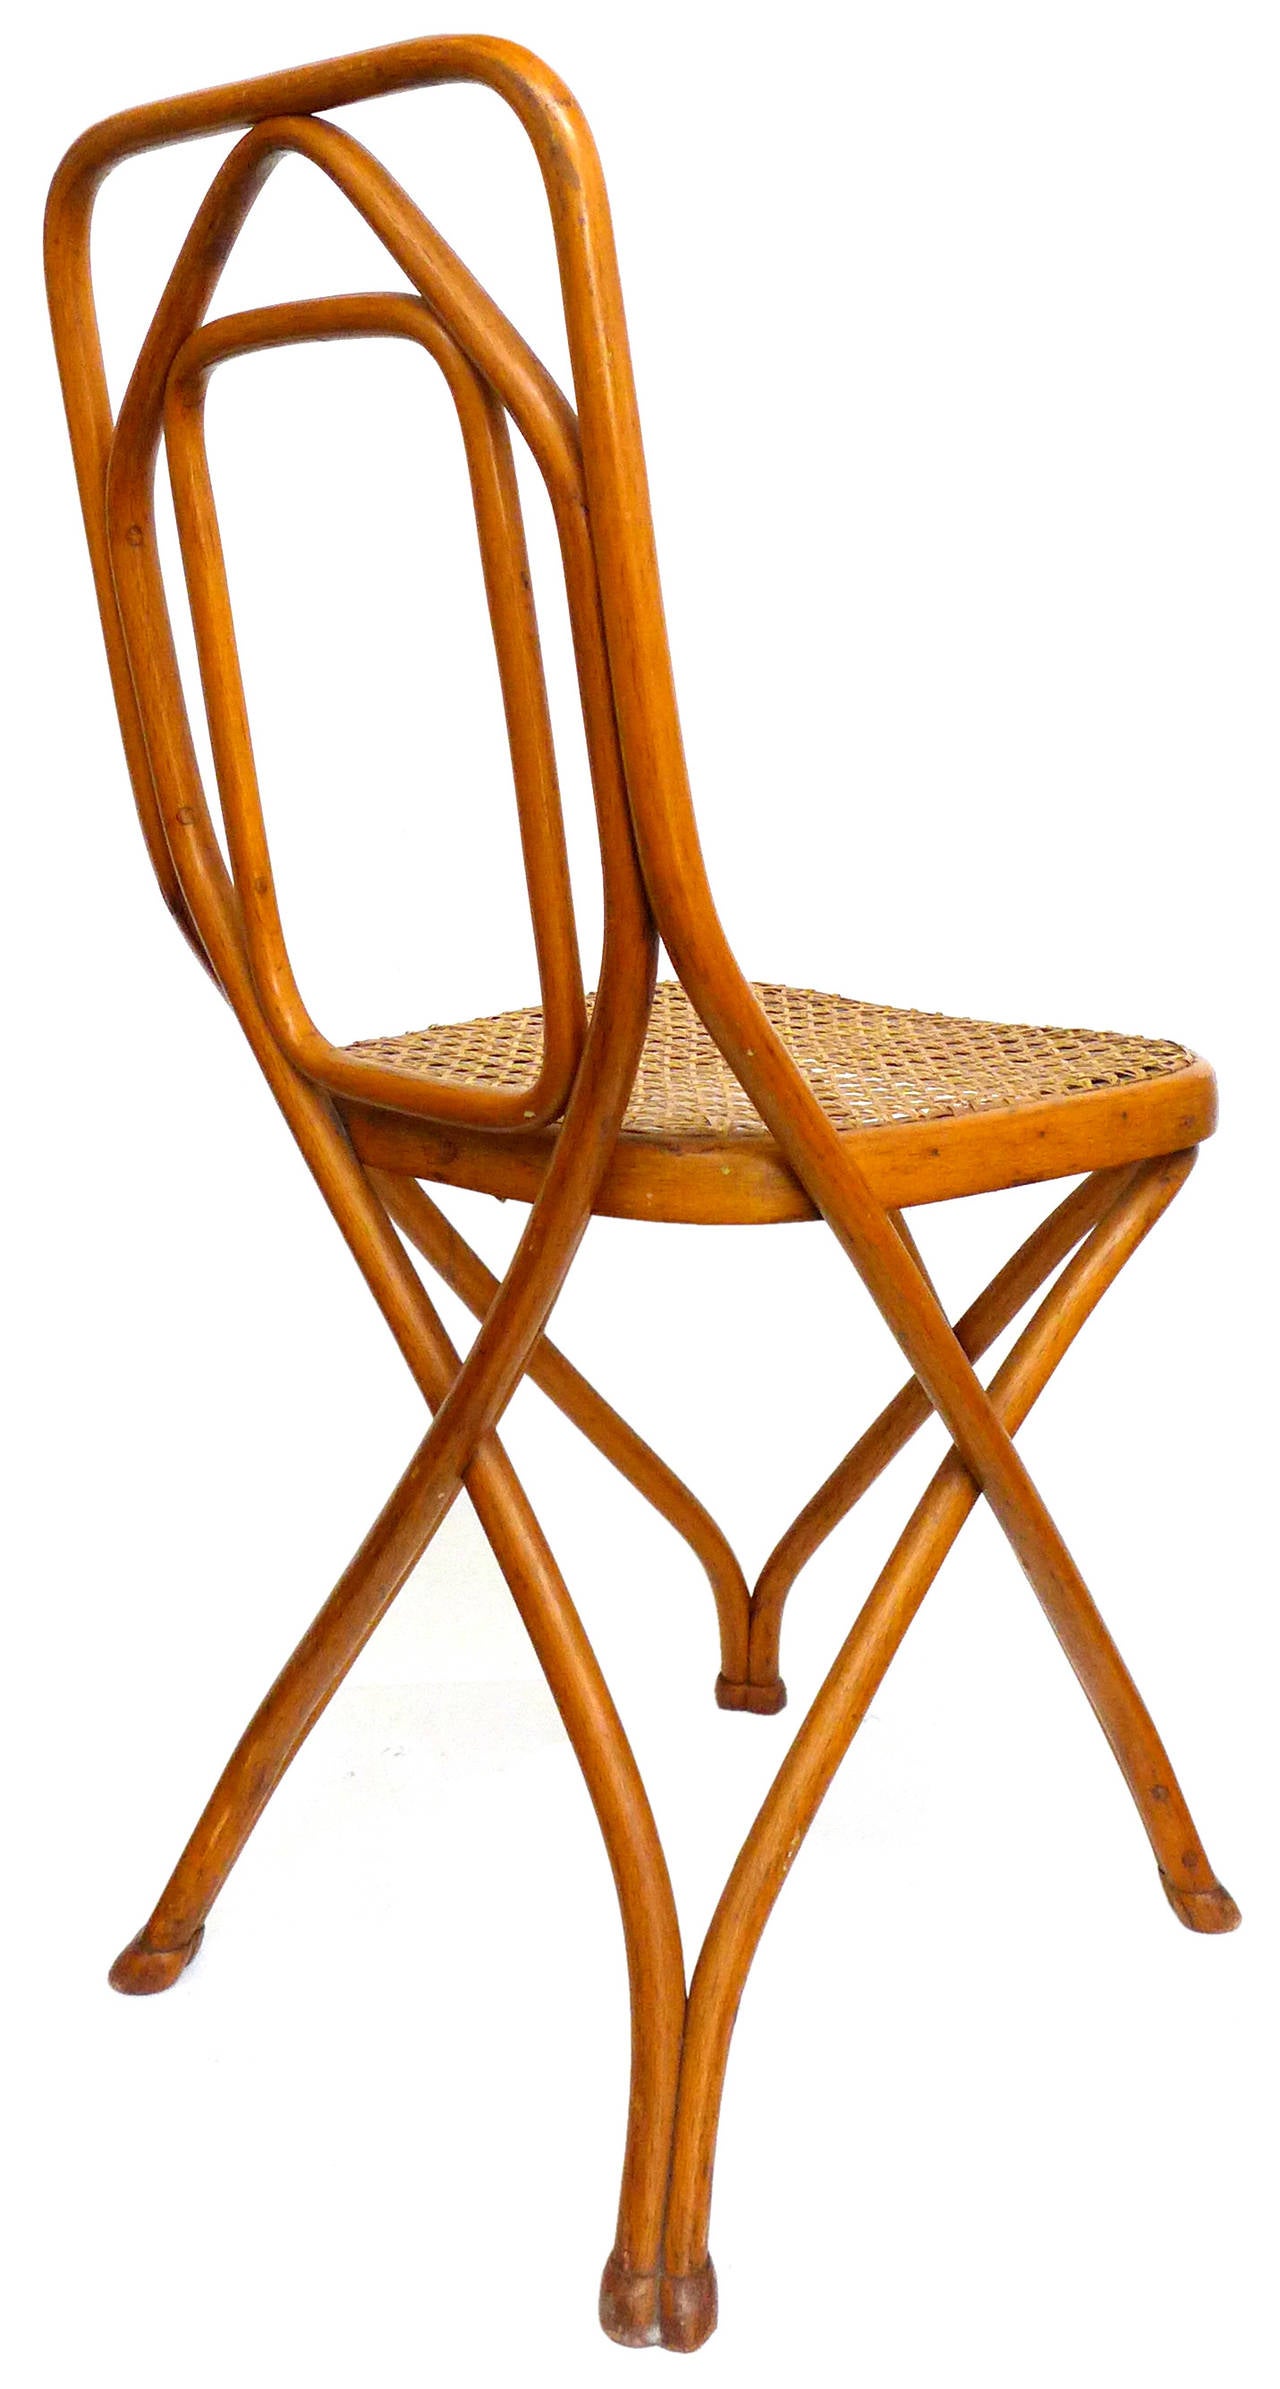 Stained Set of 4 Bentwood & Cane Chairs by Thonet